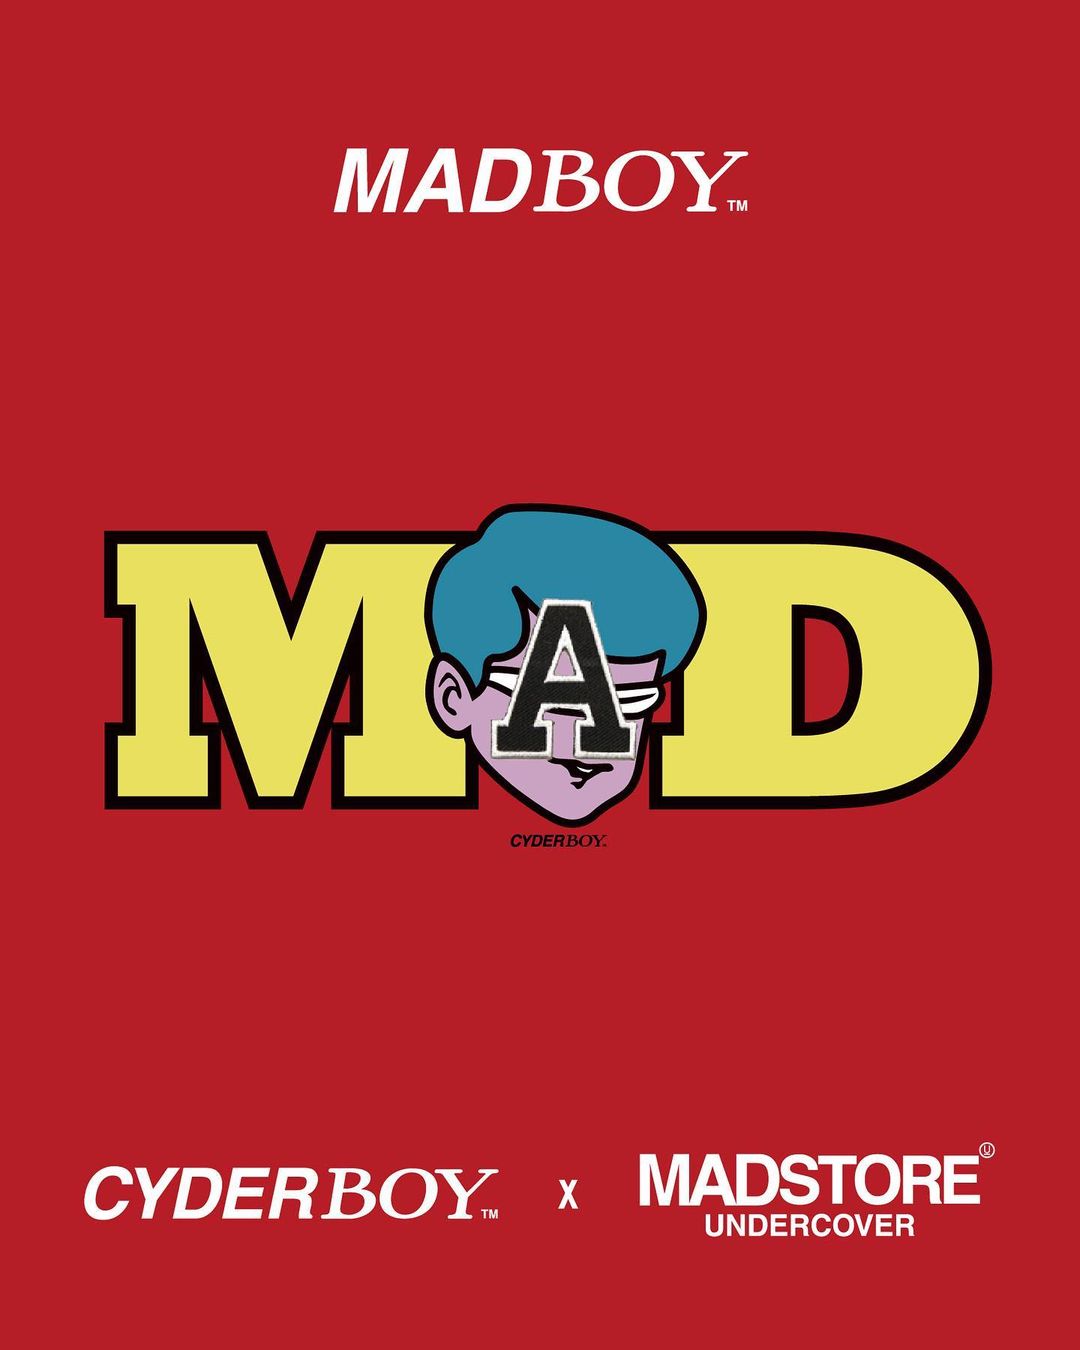 MADSTORE UNDERCOVER CYBERBOY 2021